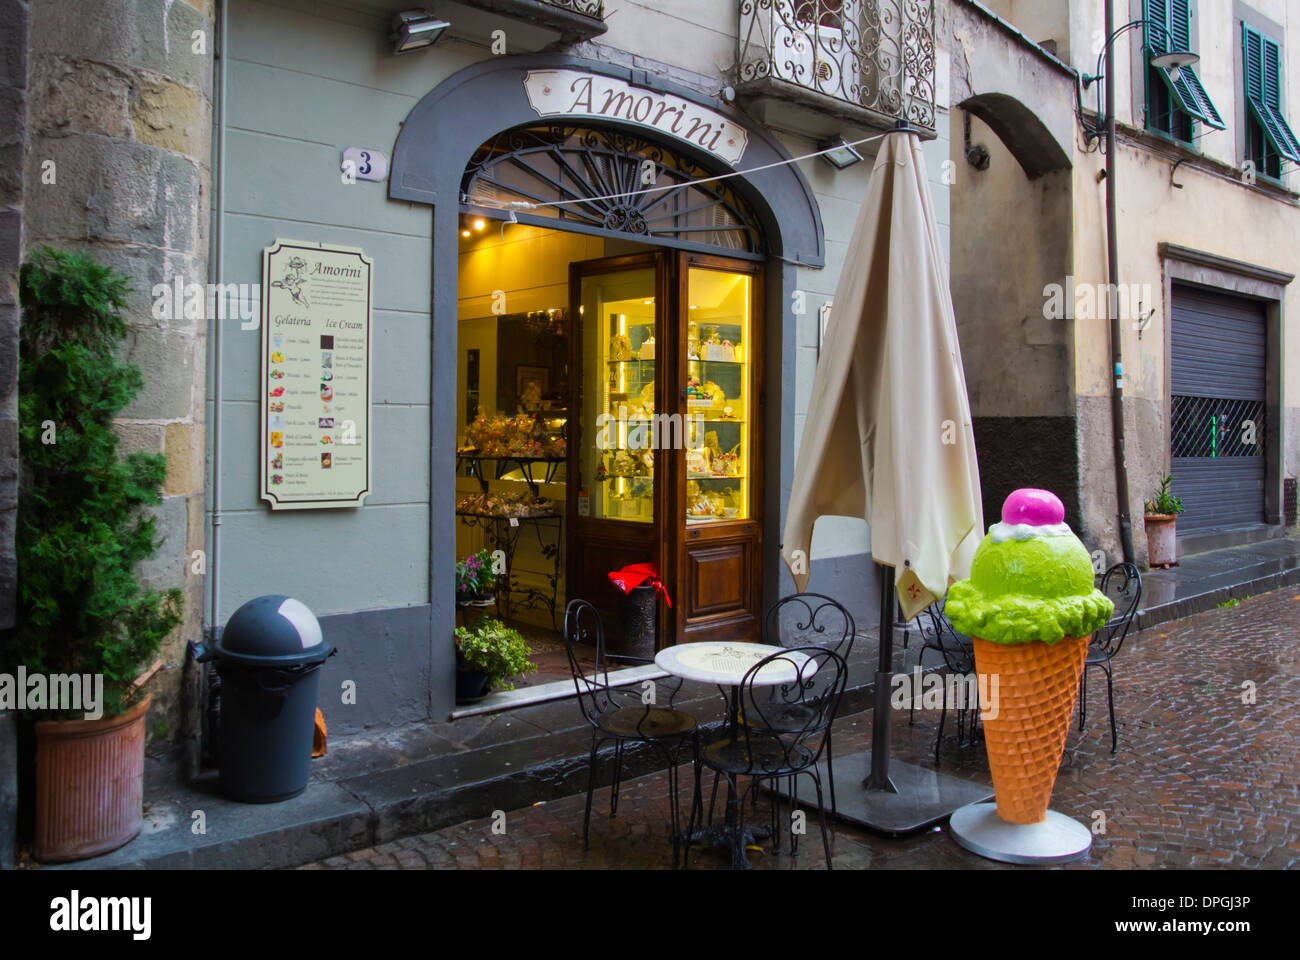 Amorini cafe and ice cream parlour old town Lucca city Tuscany region Italy Europe Stock Photo